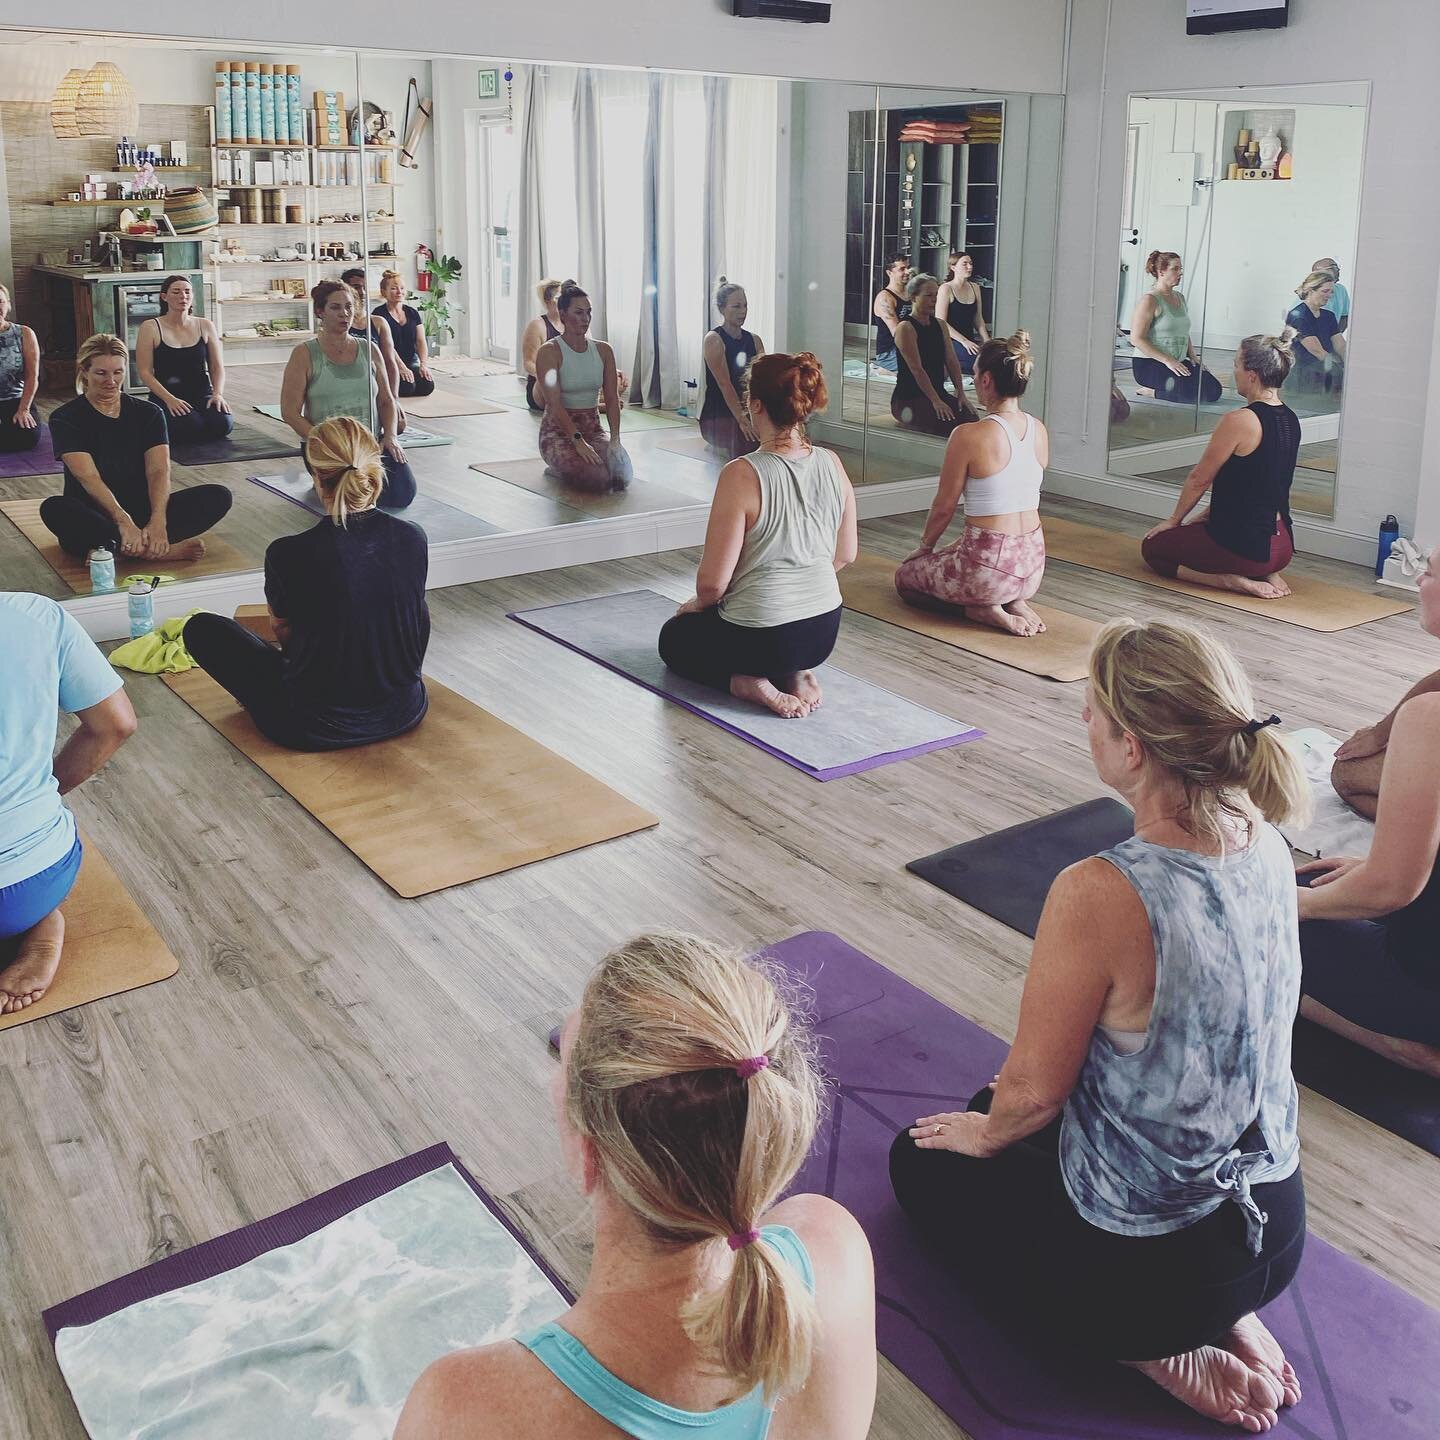 💫 September schedule is now live with one schedule change, HOT 26 &amp; 2 (Bikram) Series now also on Sunday morning&rsquo;s @ 9am. We have had some requests for a weekend Bikram class from those who can&rsquo;t make the morning  classes during the 